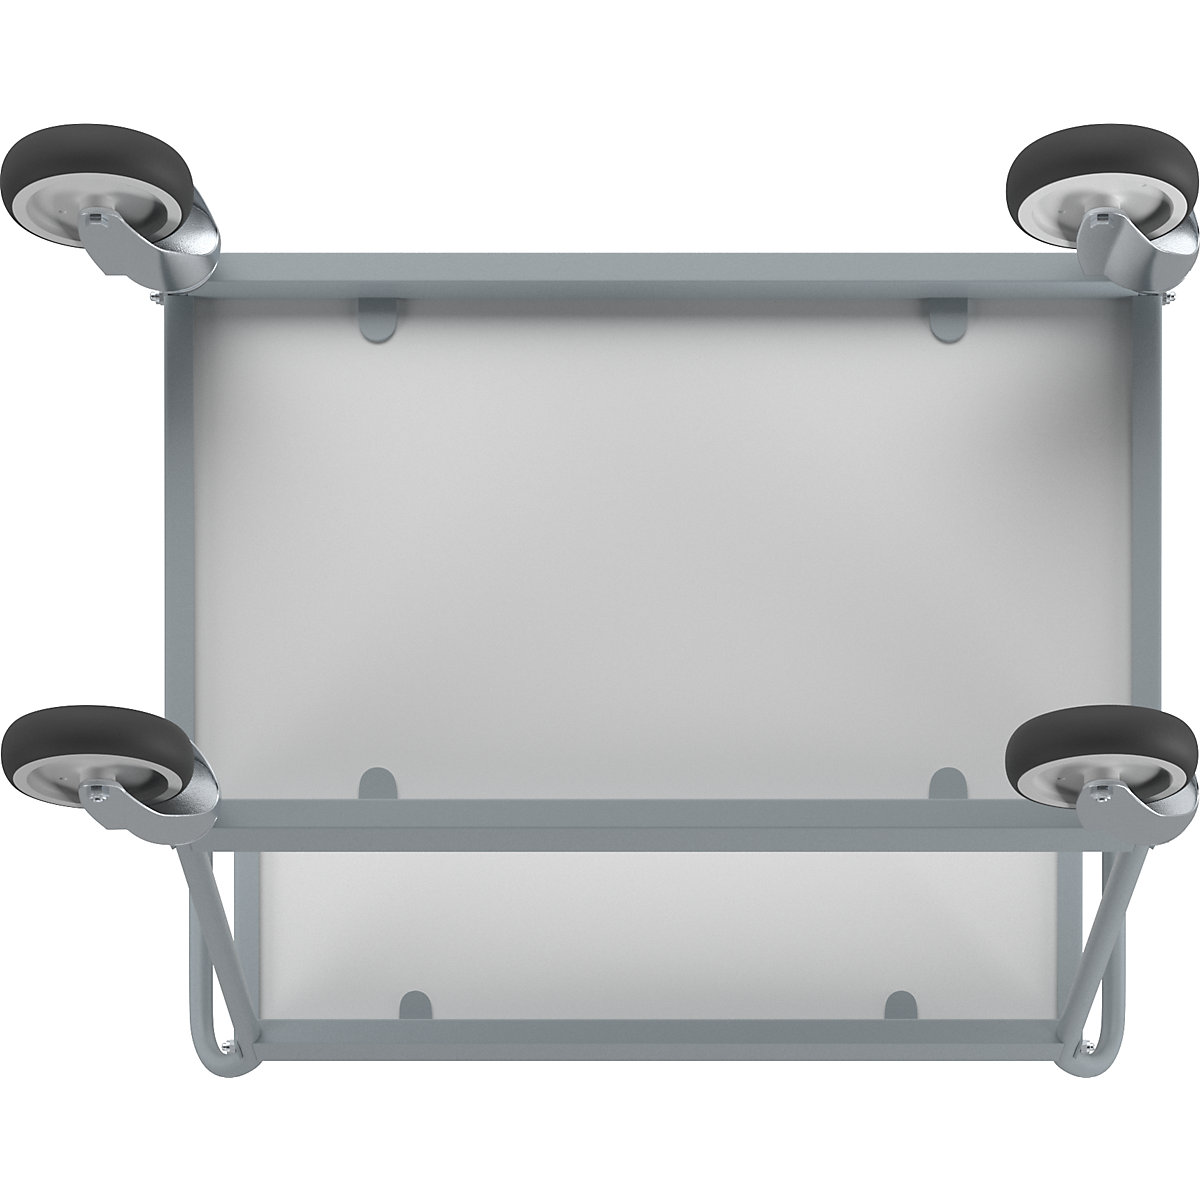 Serving trolley (Product illustration 10)-9